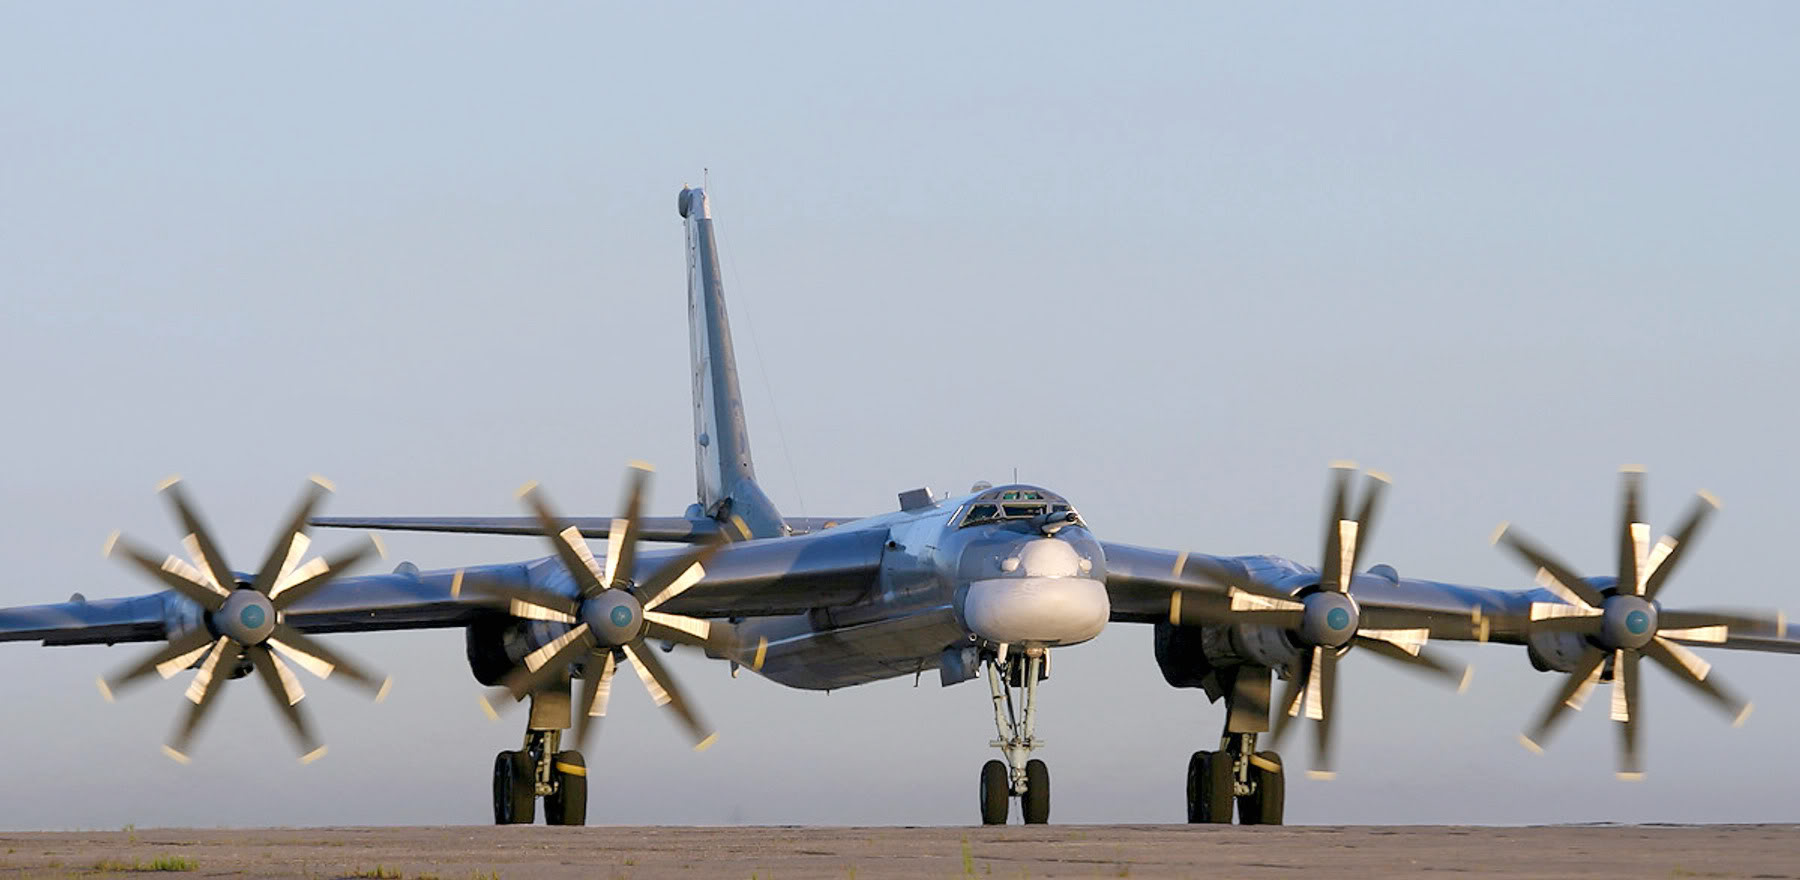 Amazing Tupolev Tu-95 Pictures & Backgrounds